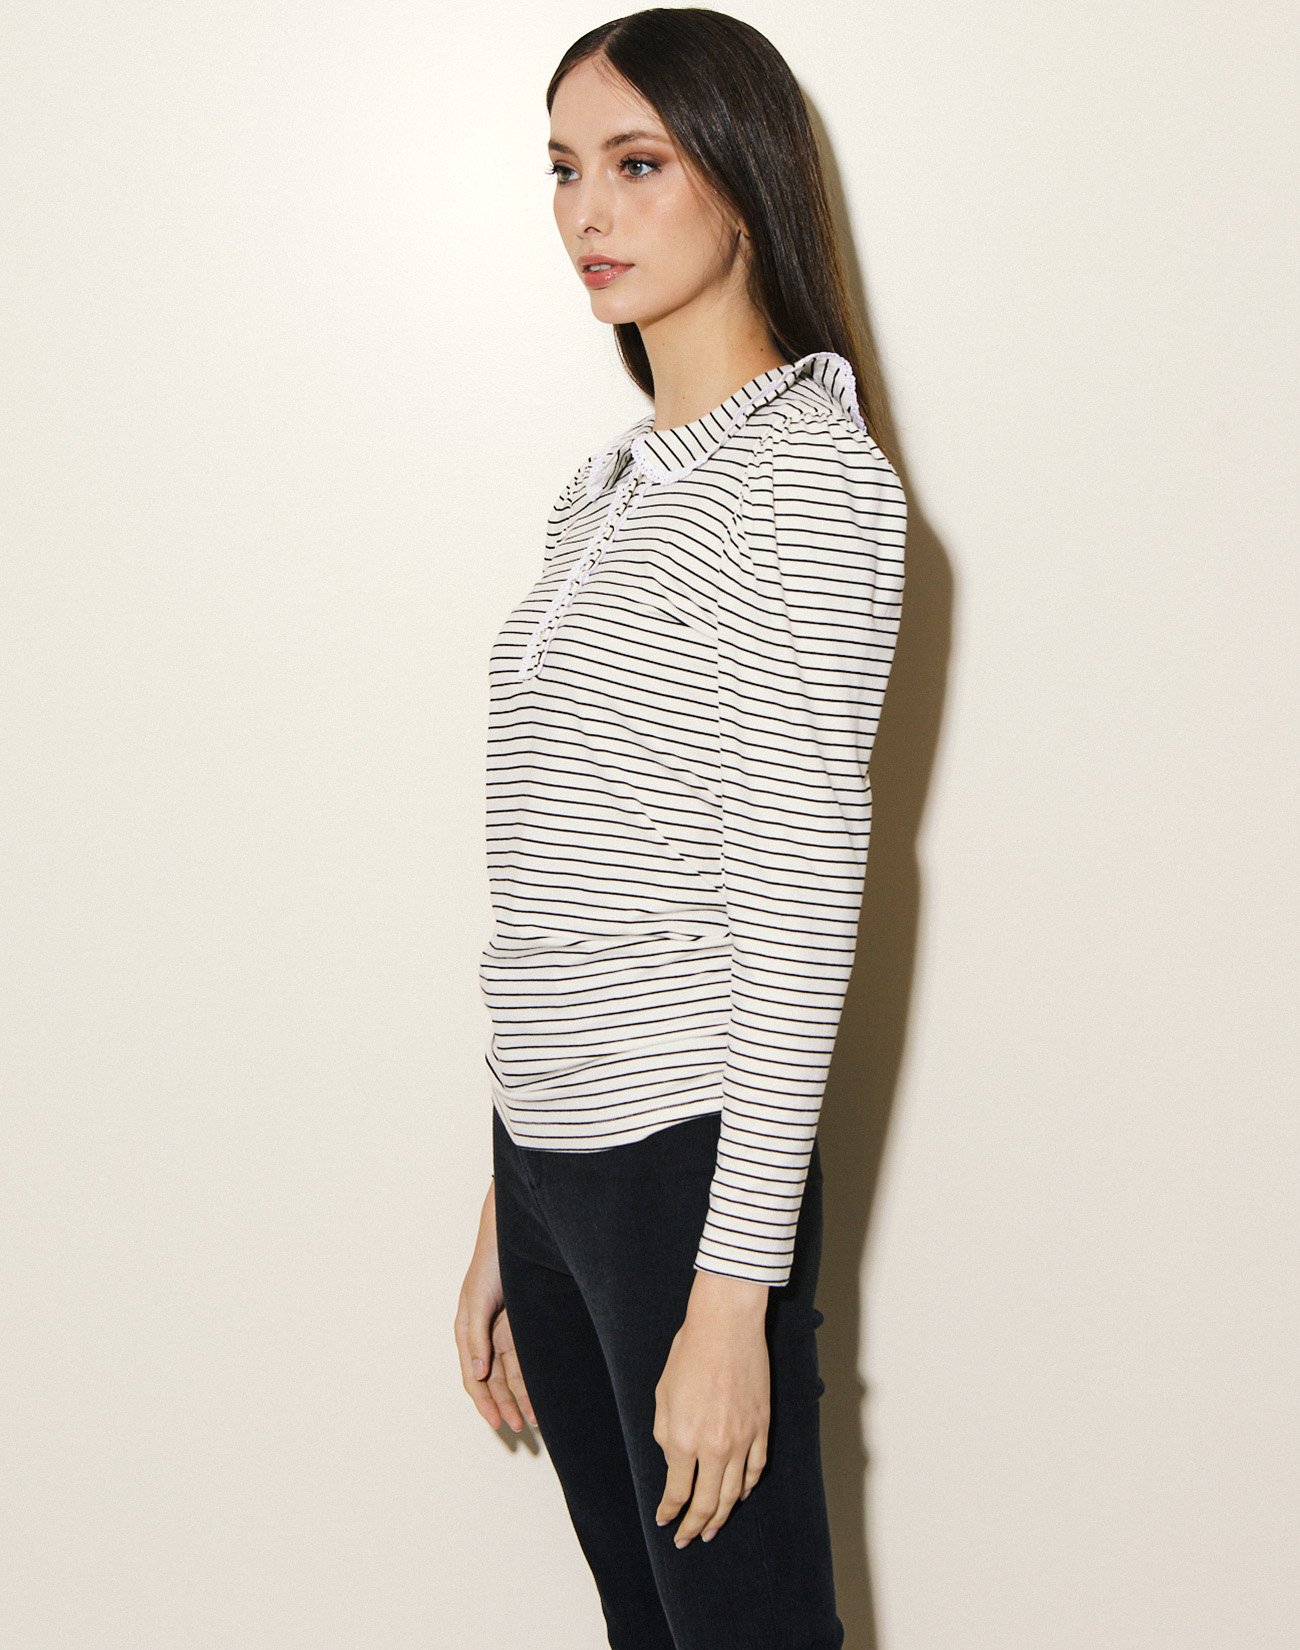 Striped blouse with jewel button